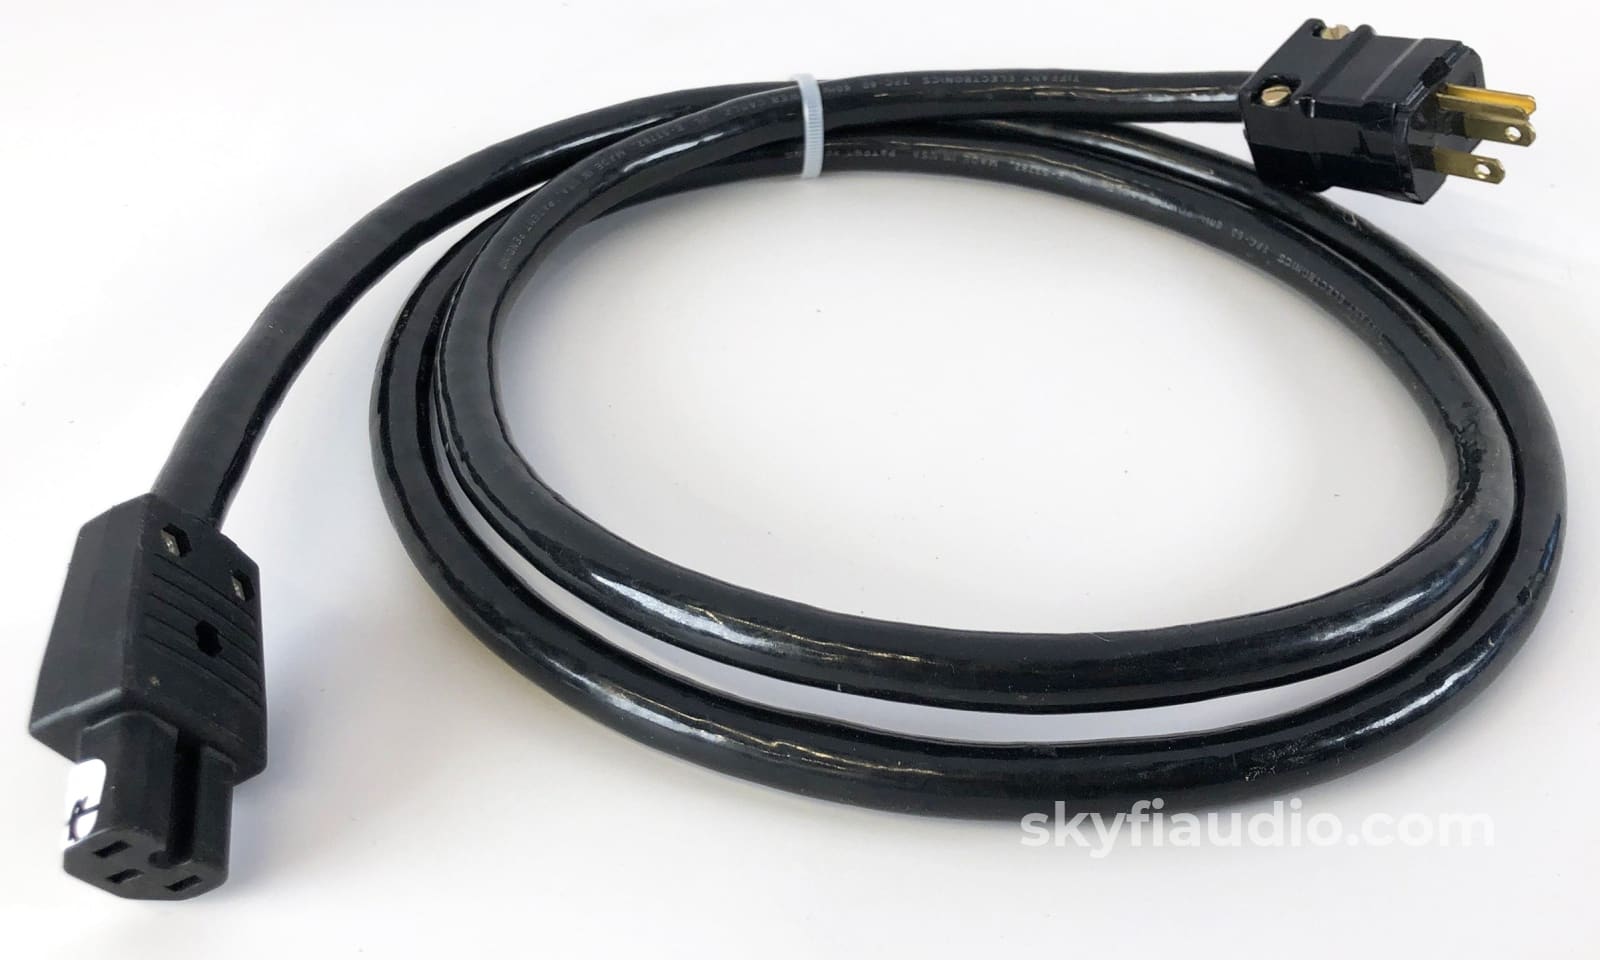 Tiffany Electronics Tpc-60 Power Cable - Superb Performer 2M Cables